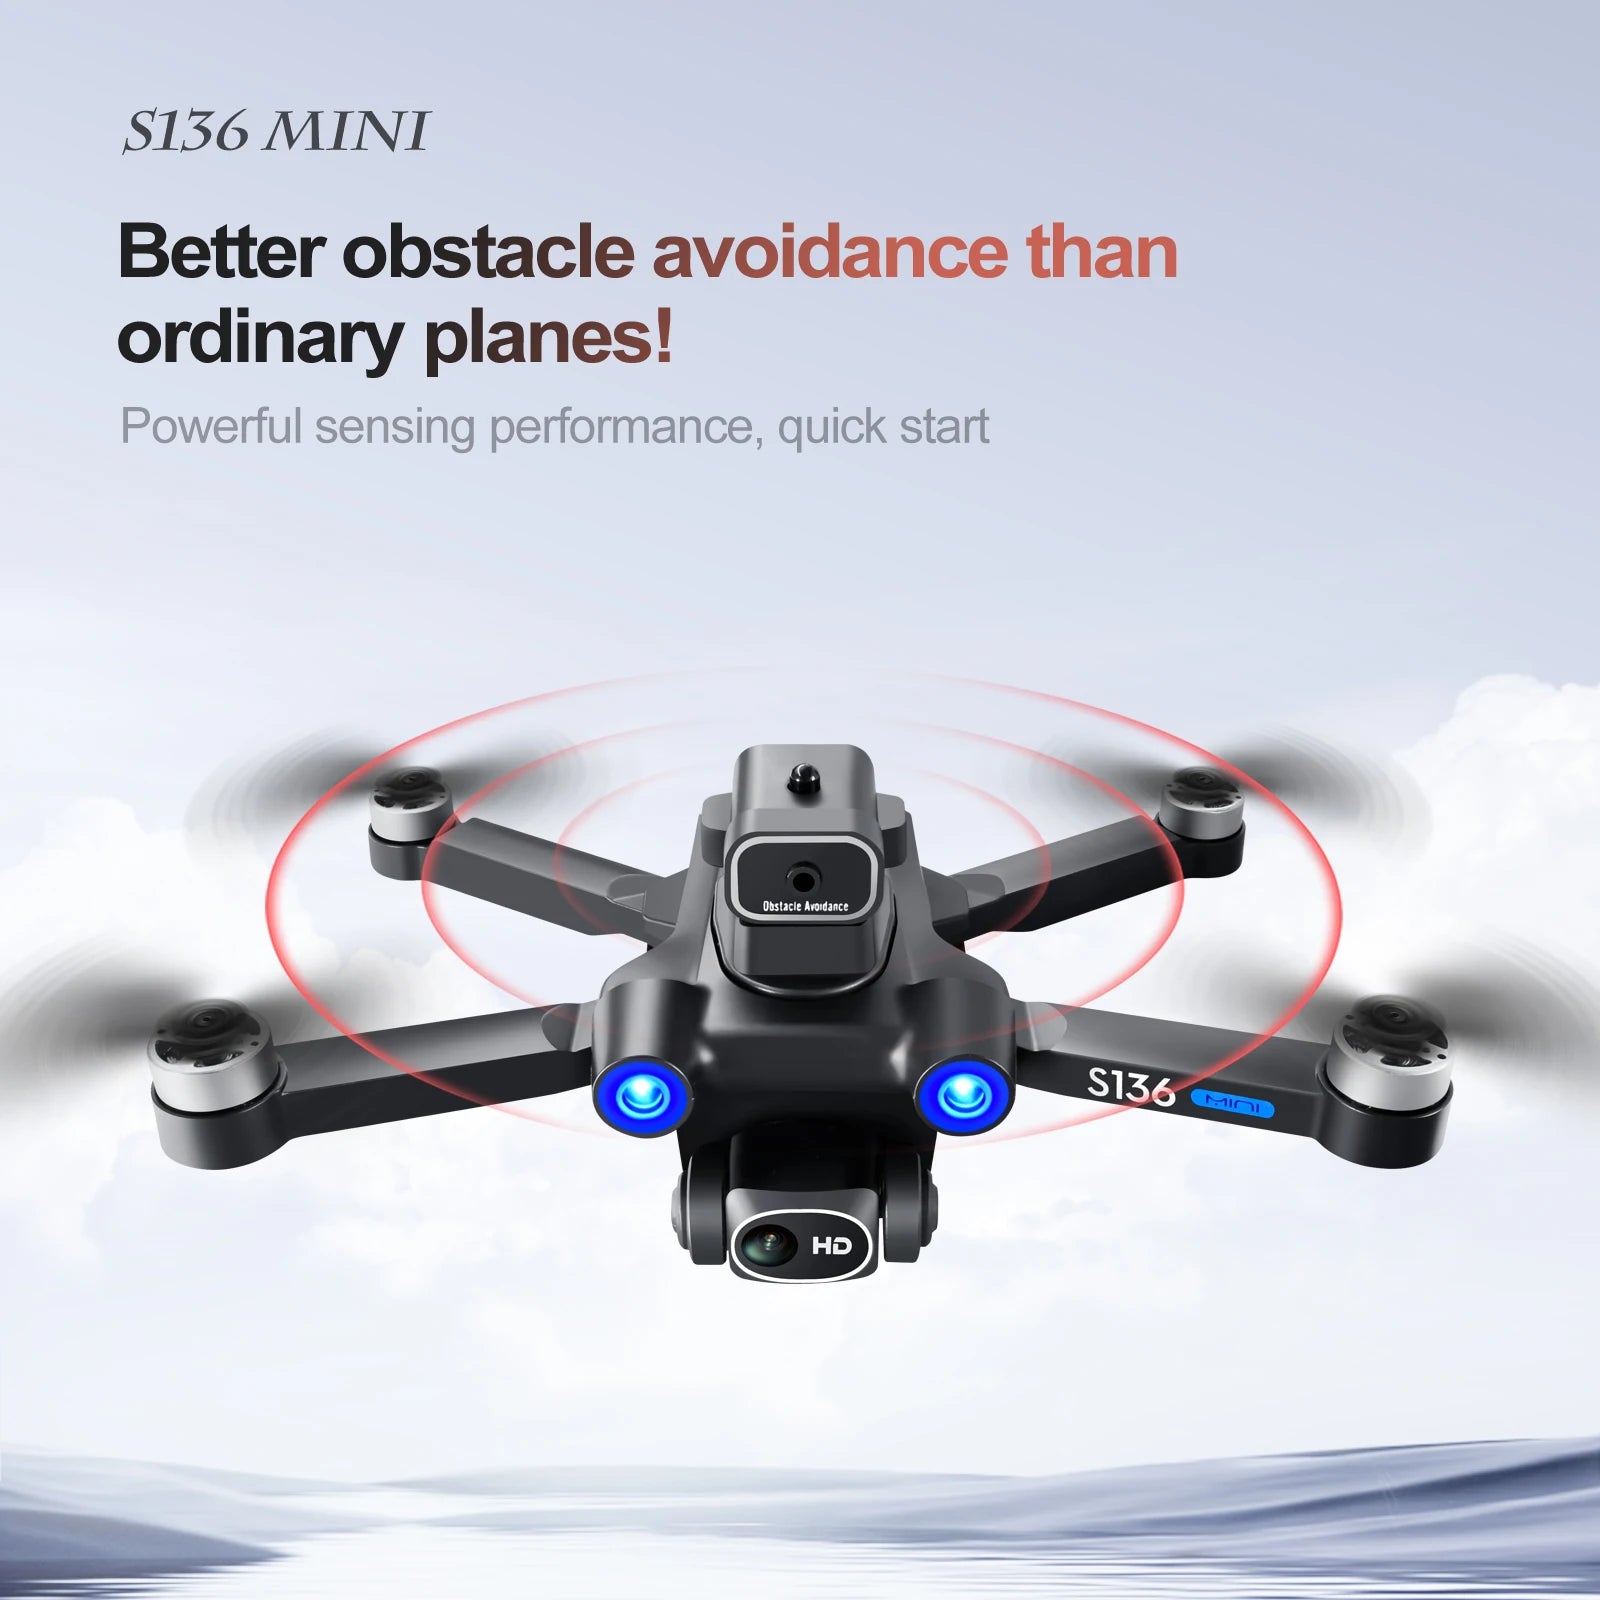 S136 GPS Drone, S136 MINI Better obstacle avoidance than ordinary planes! Dbslacle Aroid